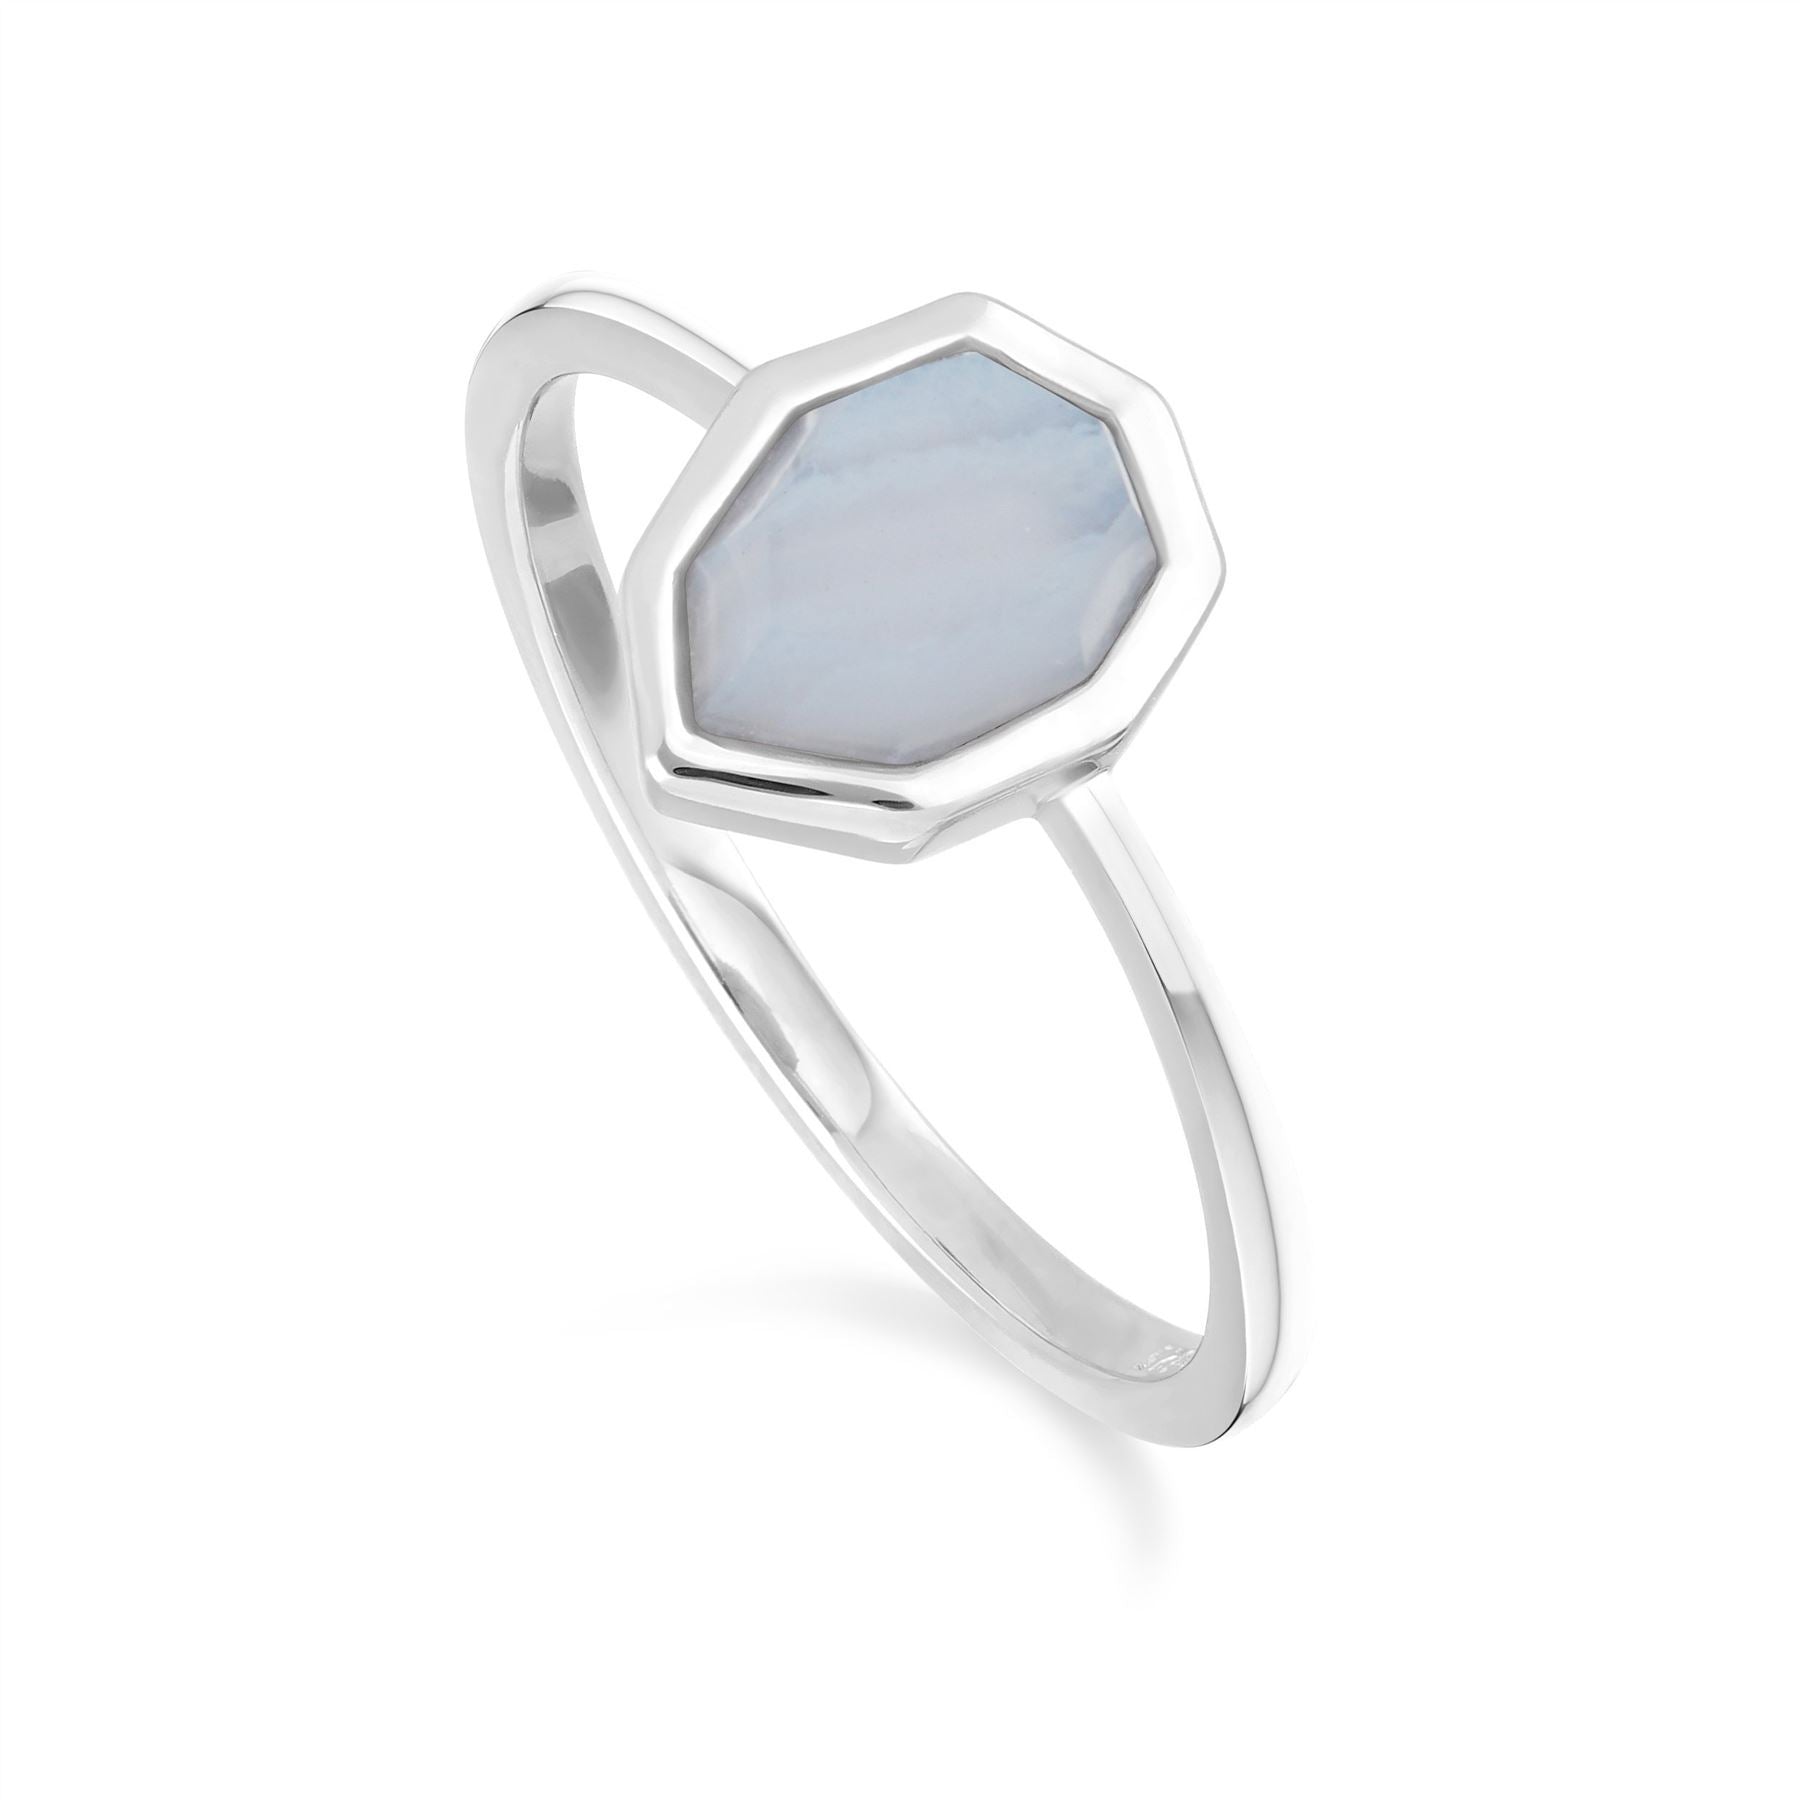 Irregular B Gem Blue Lace Agate Ring in 925 Sterling Silver